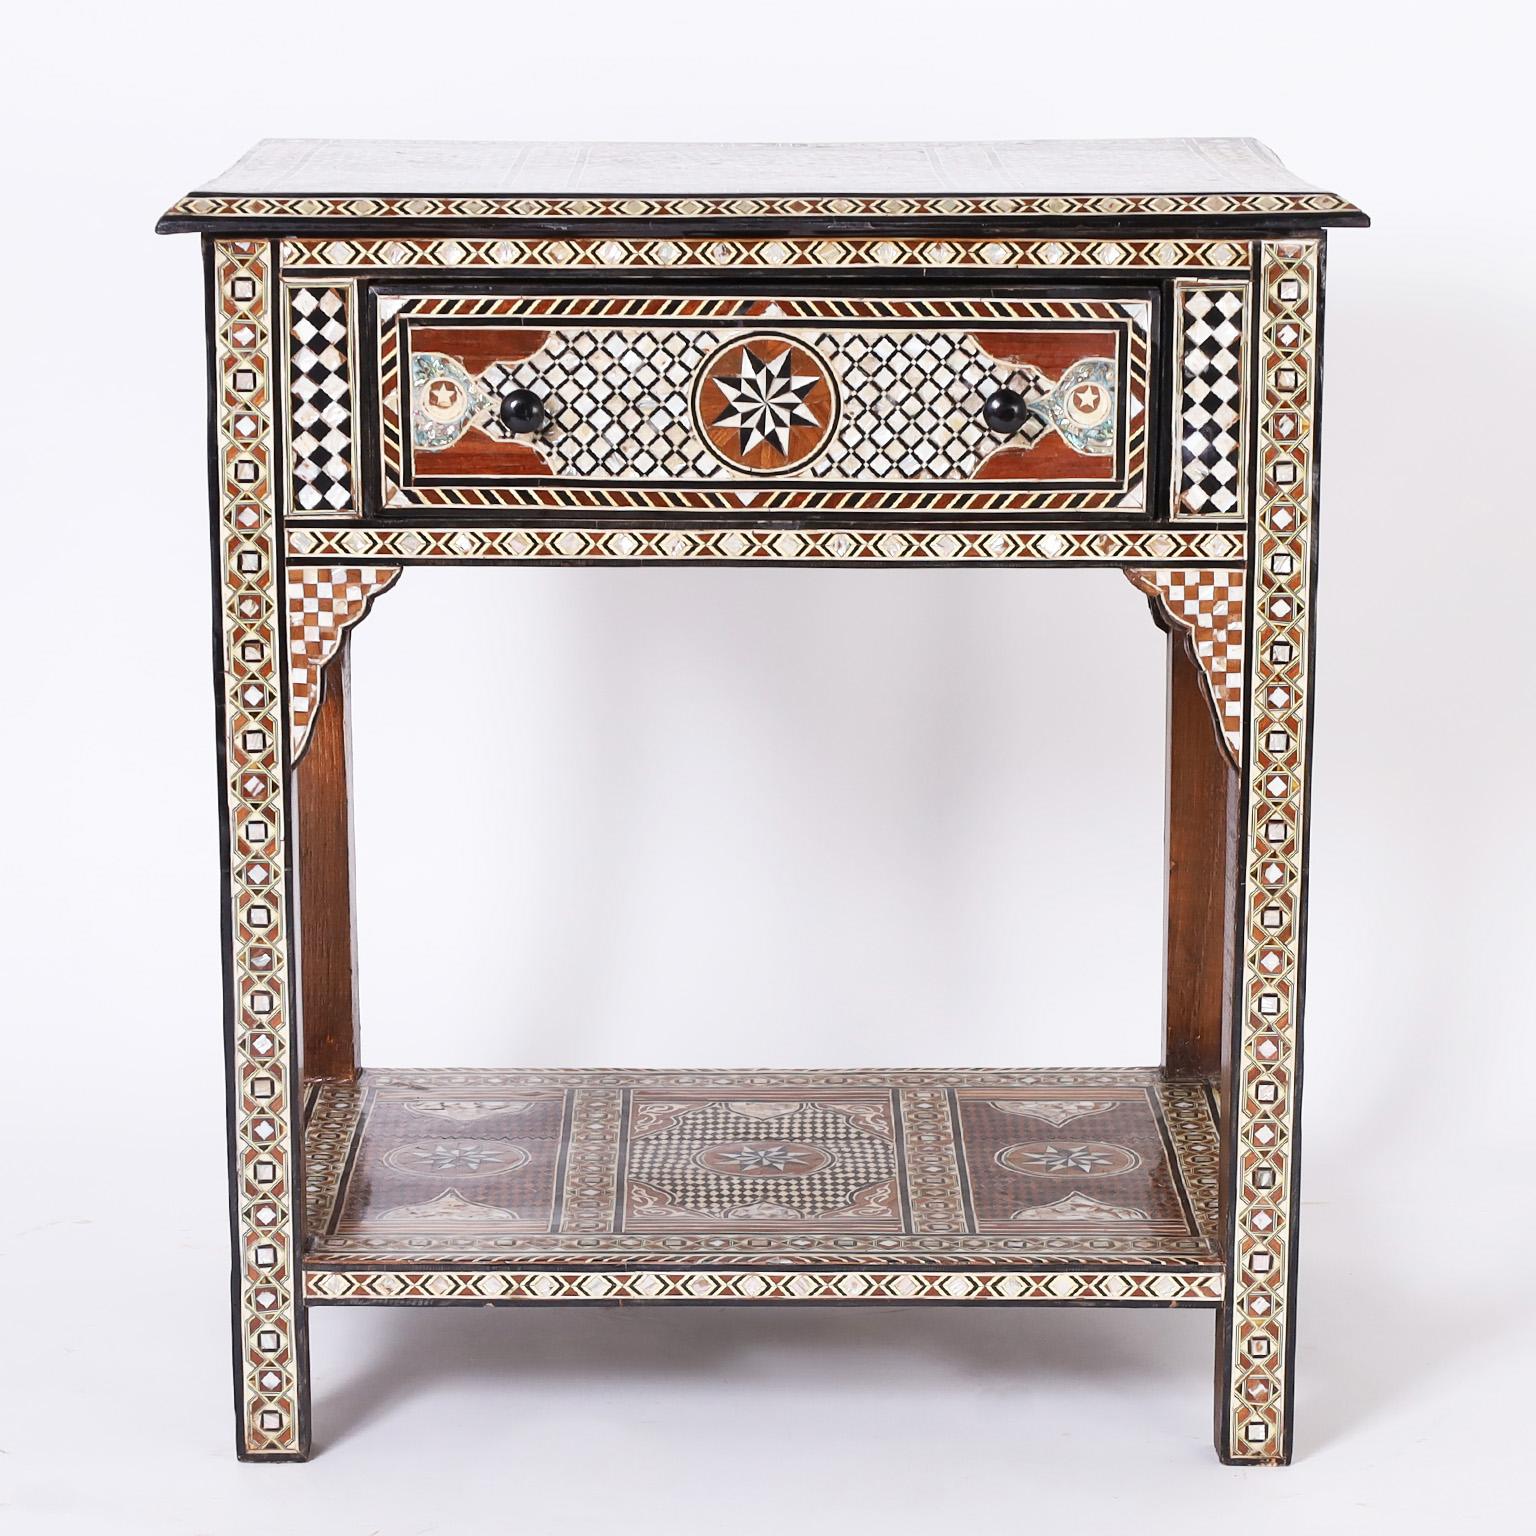 Moroccan table or stand crafted in indigenous hardwoods decorated all around with mother of pearl, mahogany, ebony and bone in elaborate inlays and marquetries with one drawer when removed reveals four secret compartments.